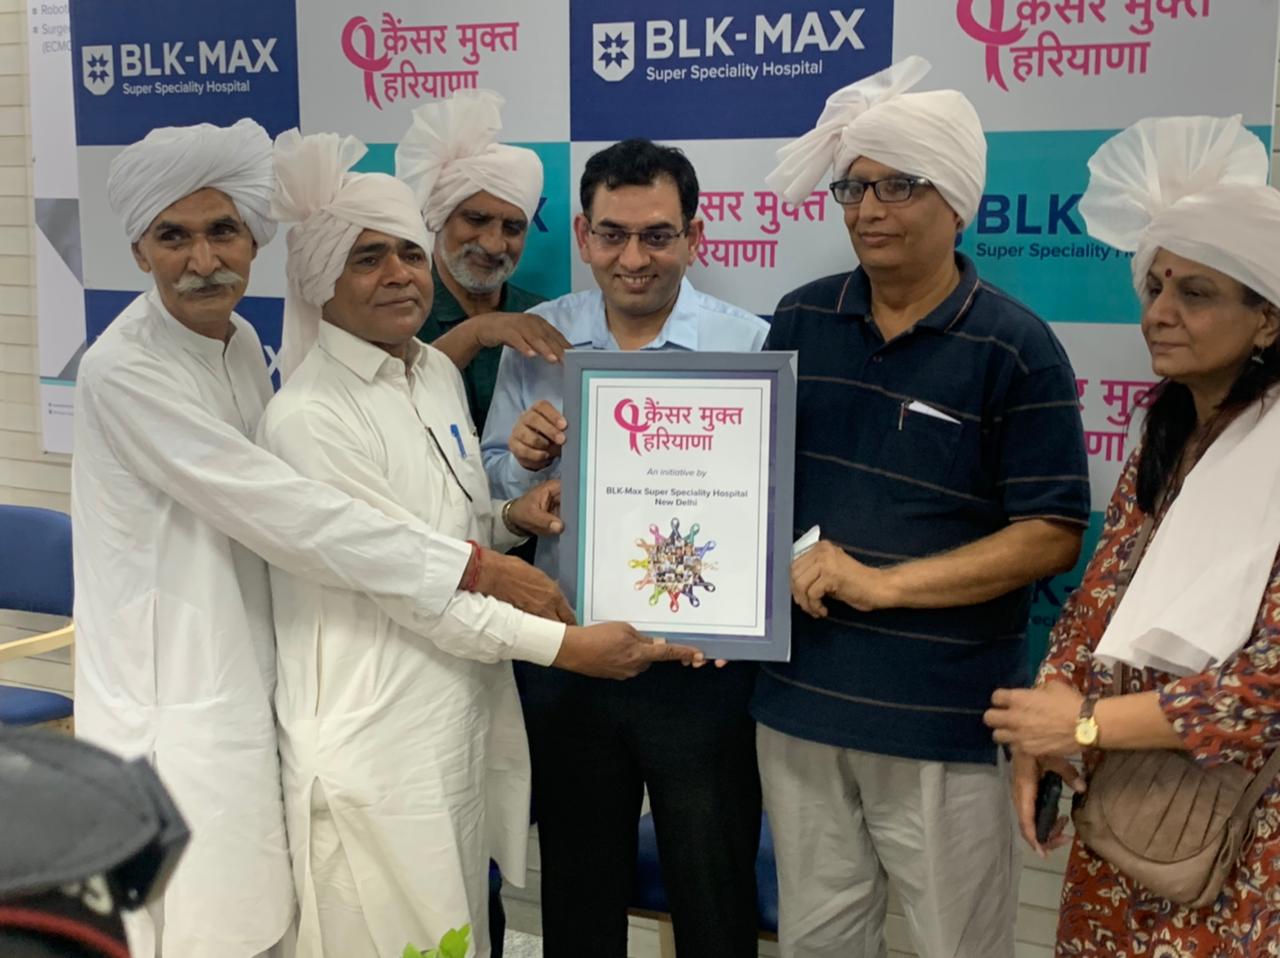 BLK-Max Super Speciality Hospital: Best Hospital in Delhi, India